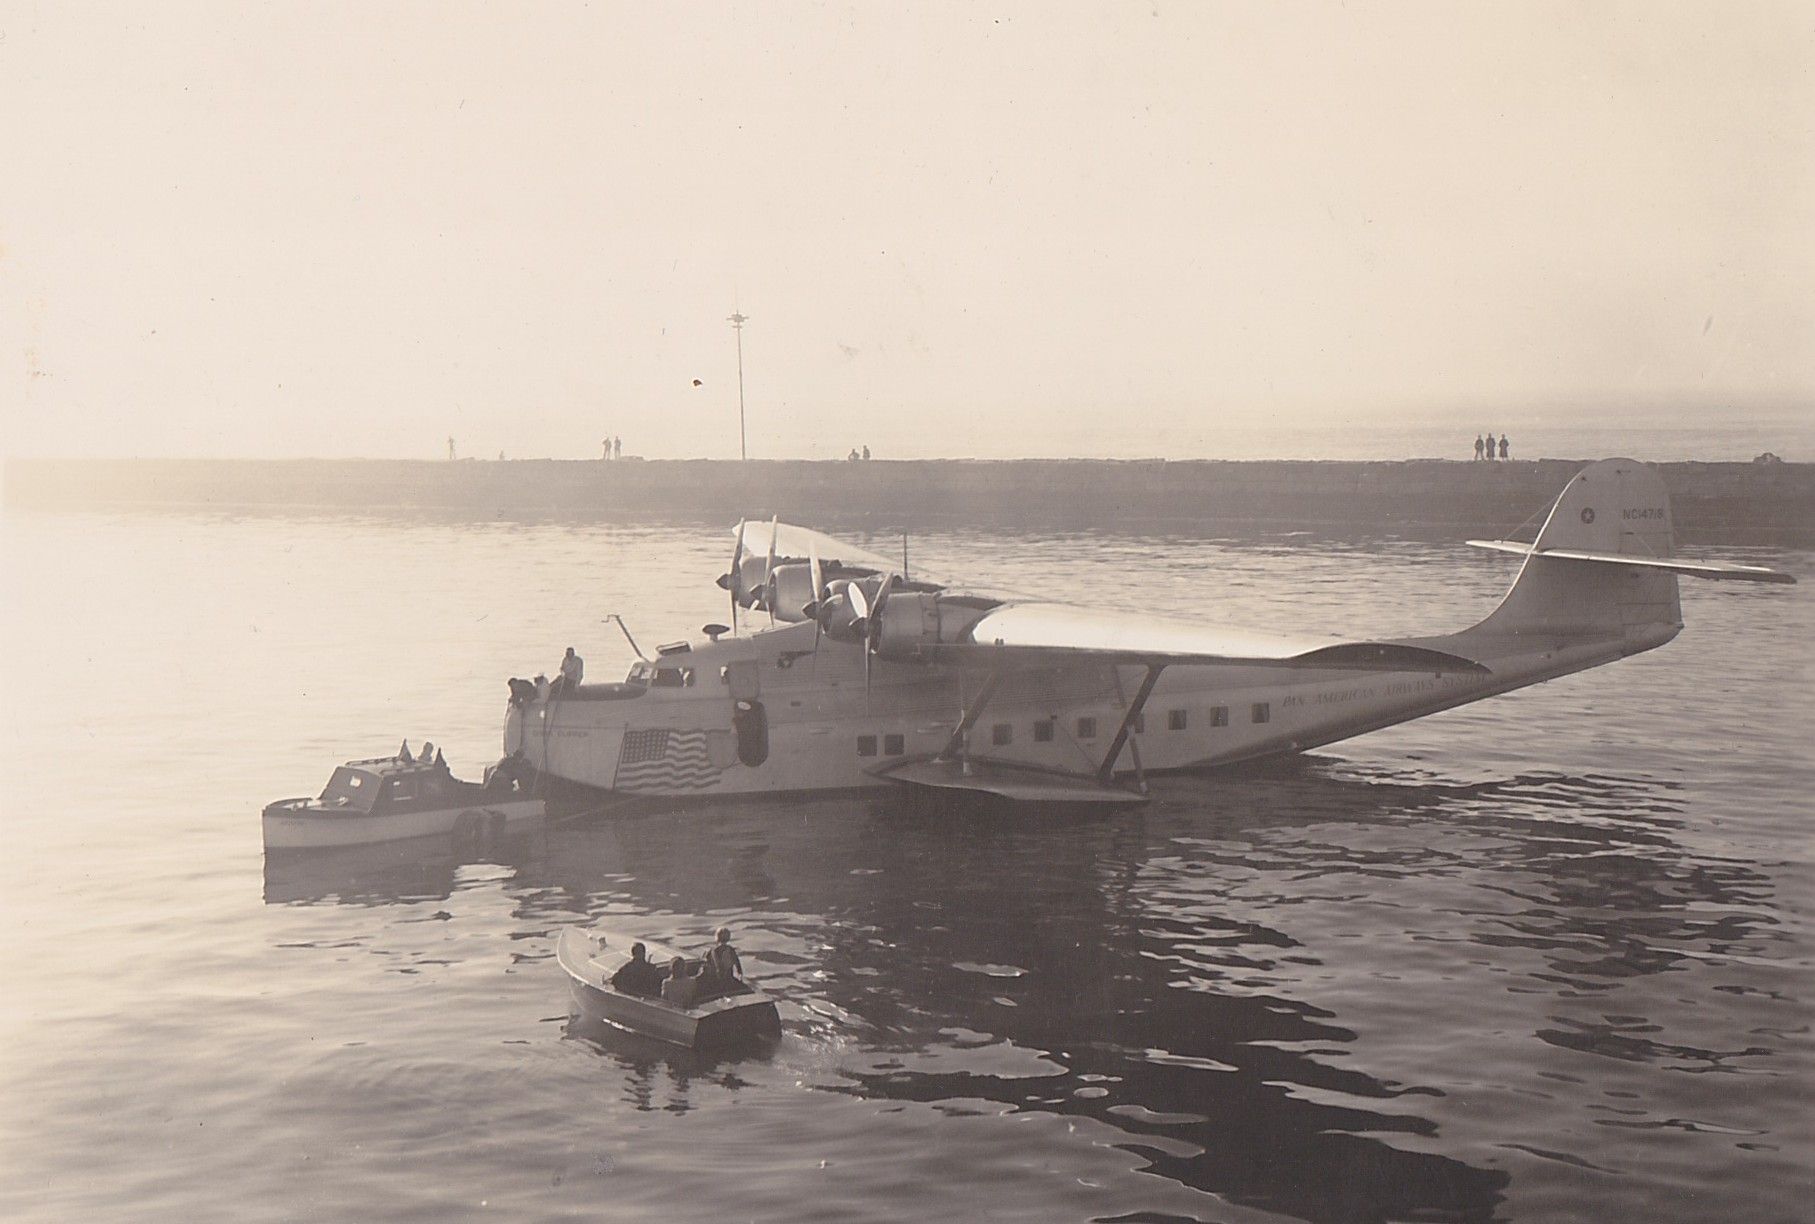 Small boats arrive at the M-130 China Clipper sitting in water.